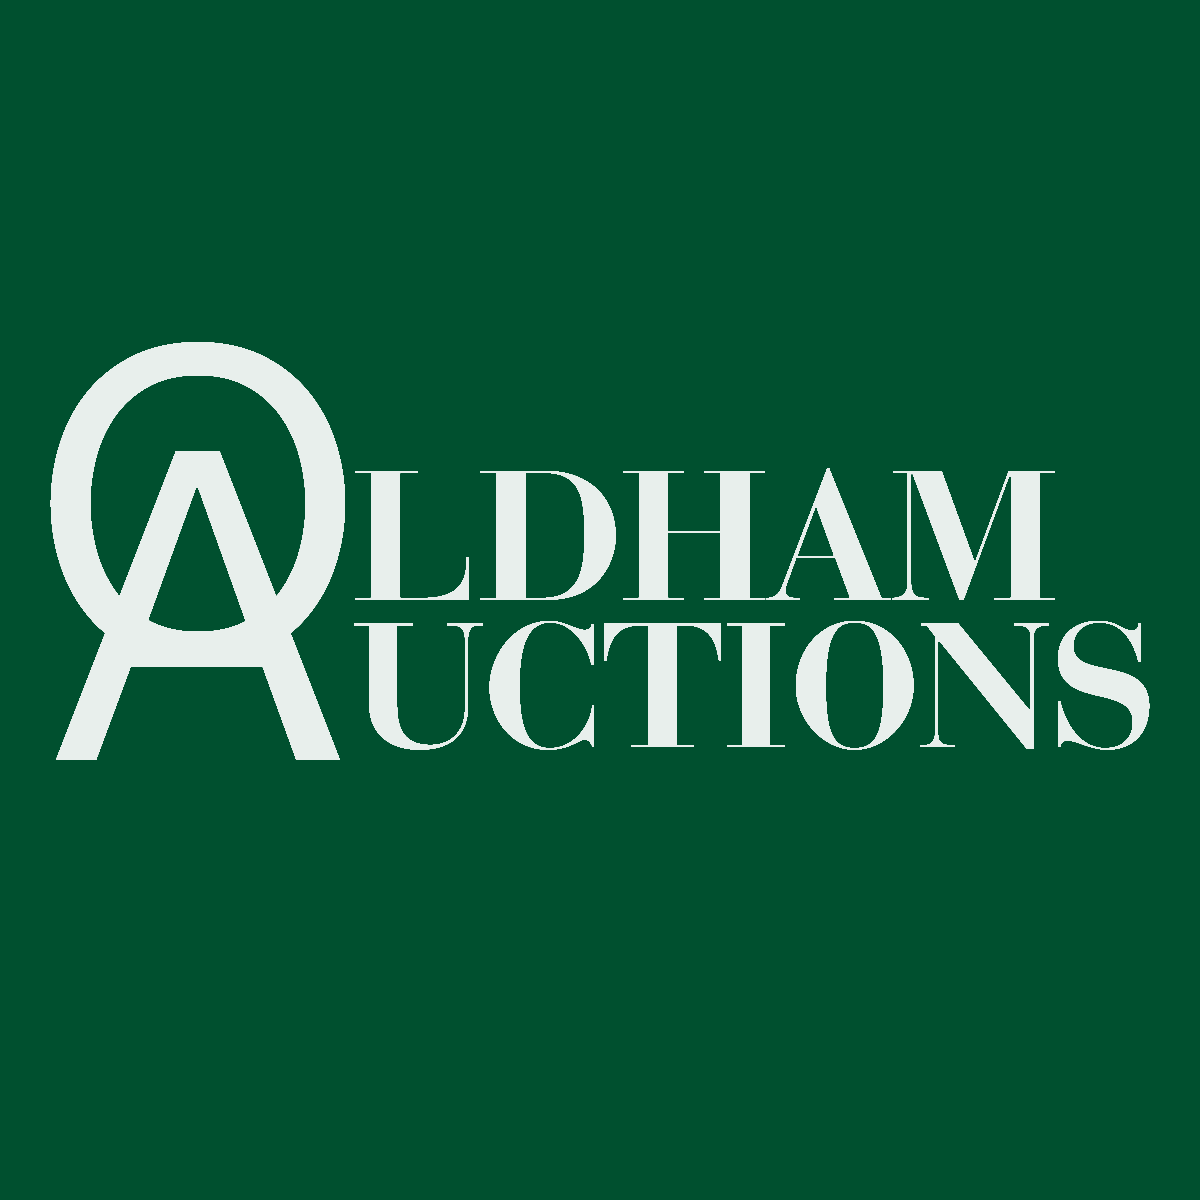 (c) Oldhamauctions.com